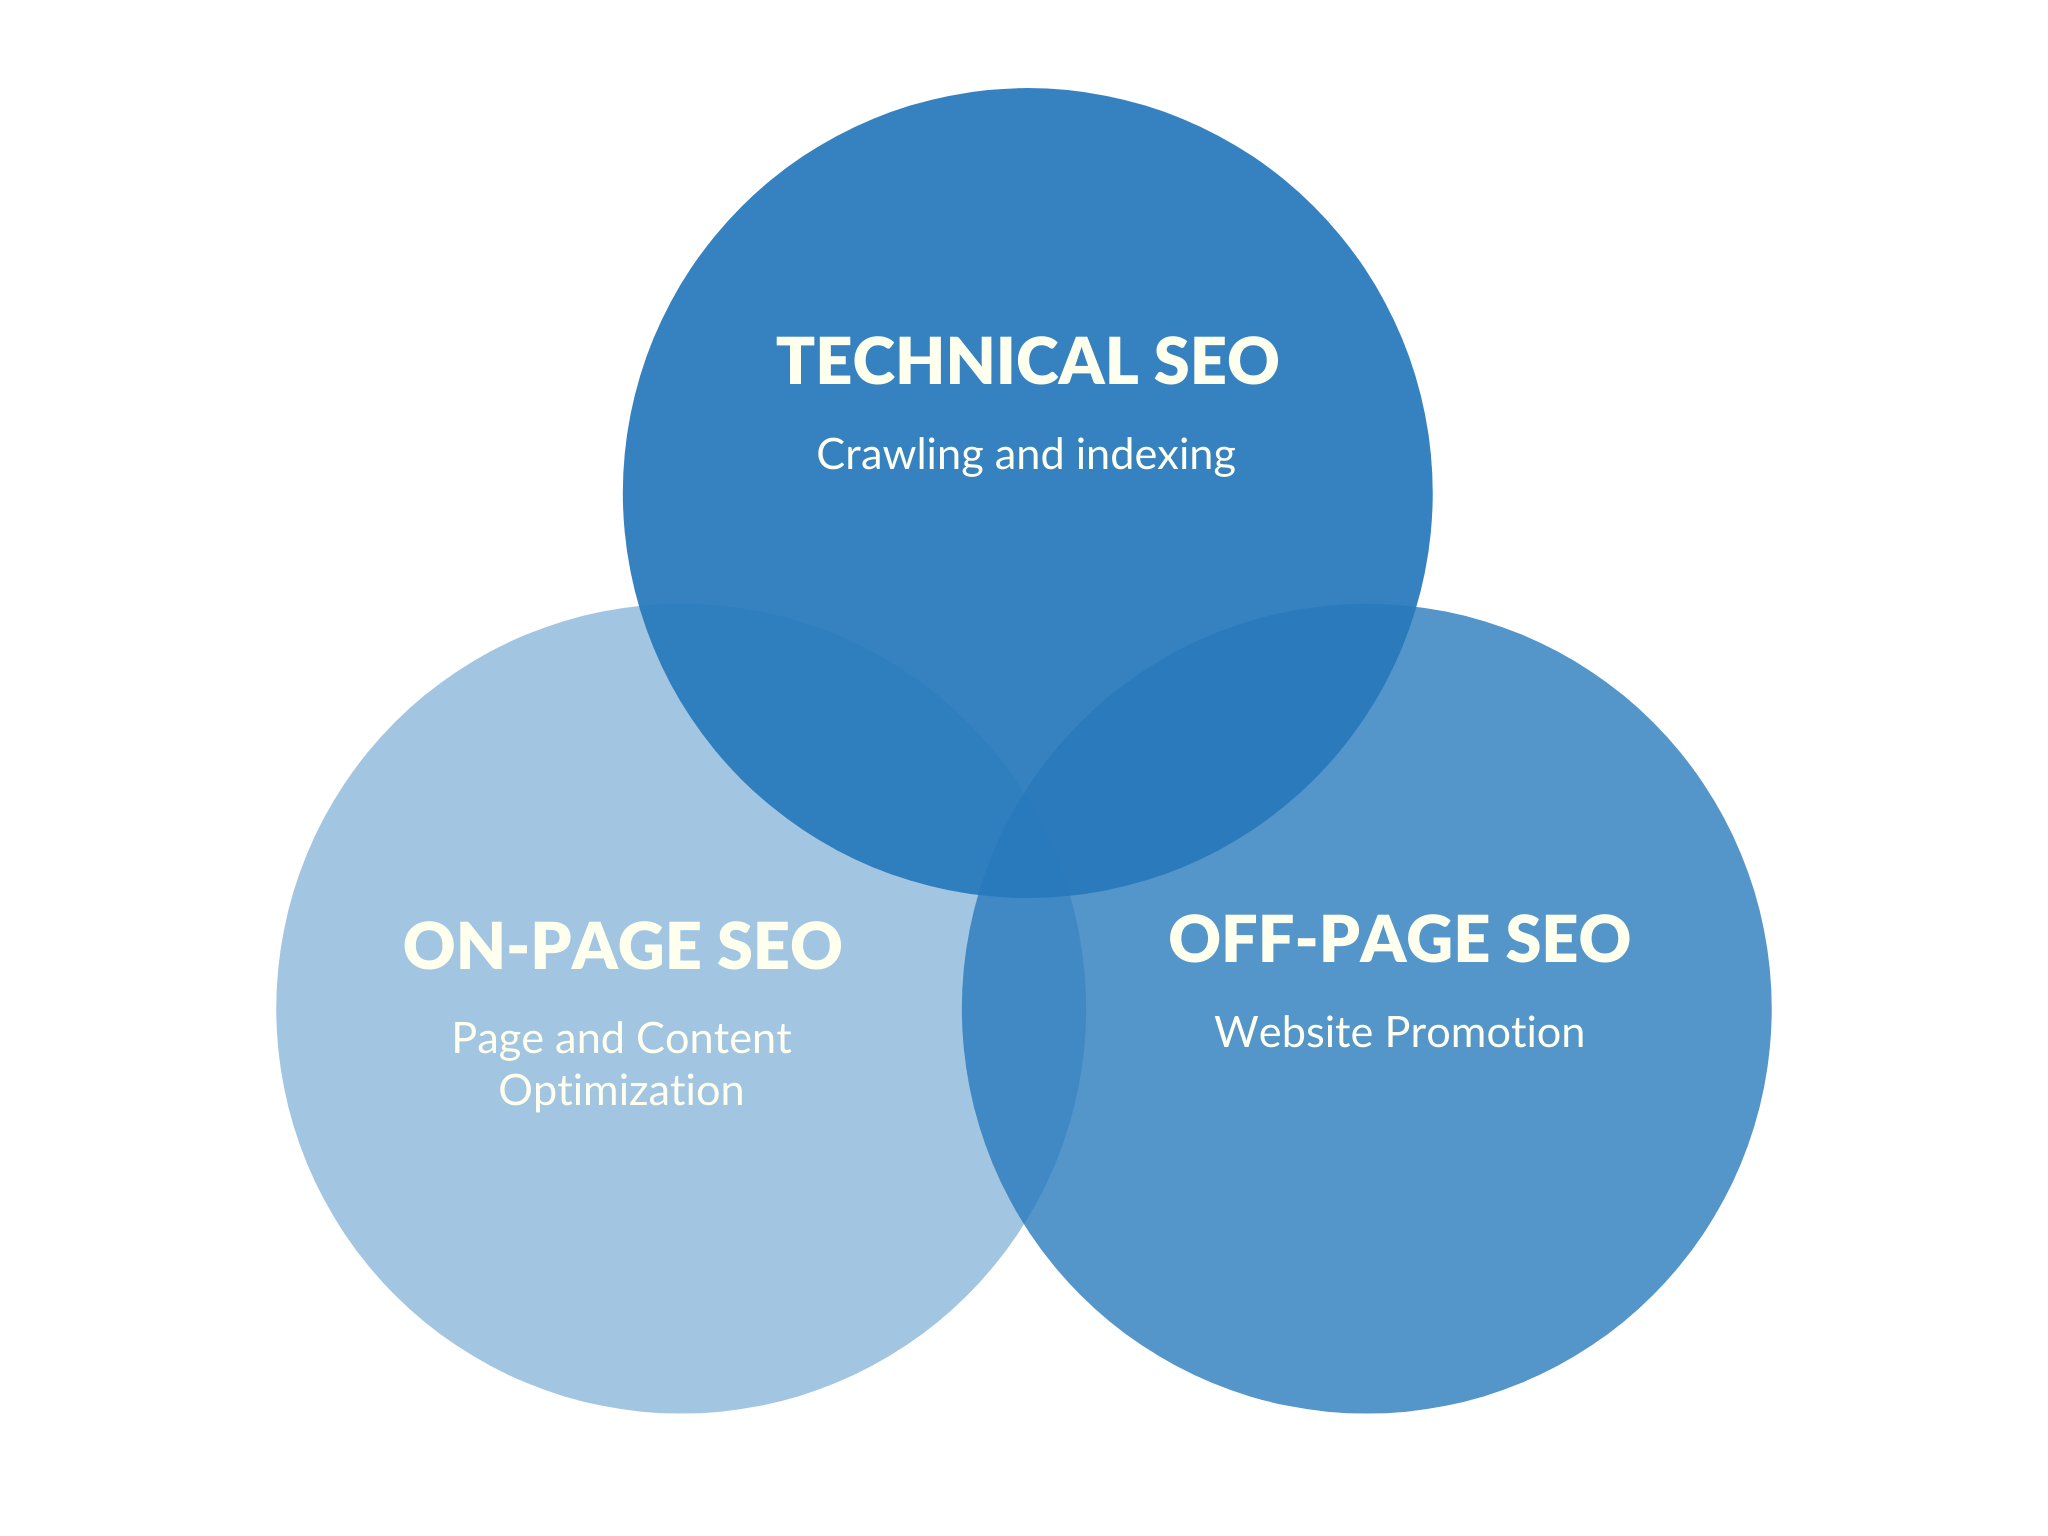 On-Page SEO and SEO